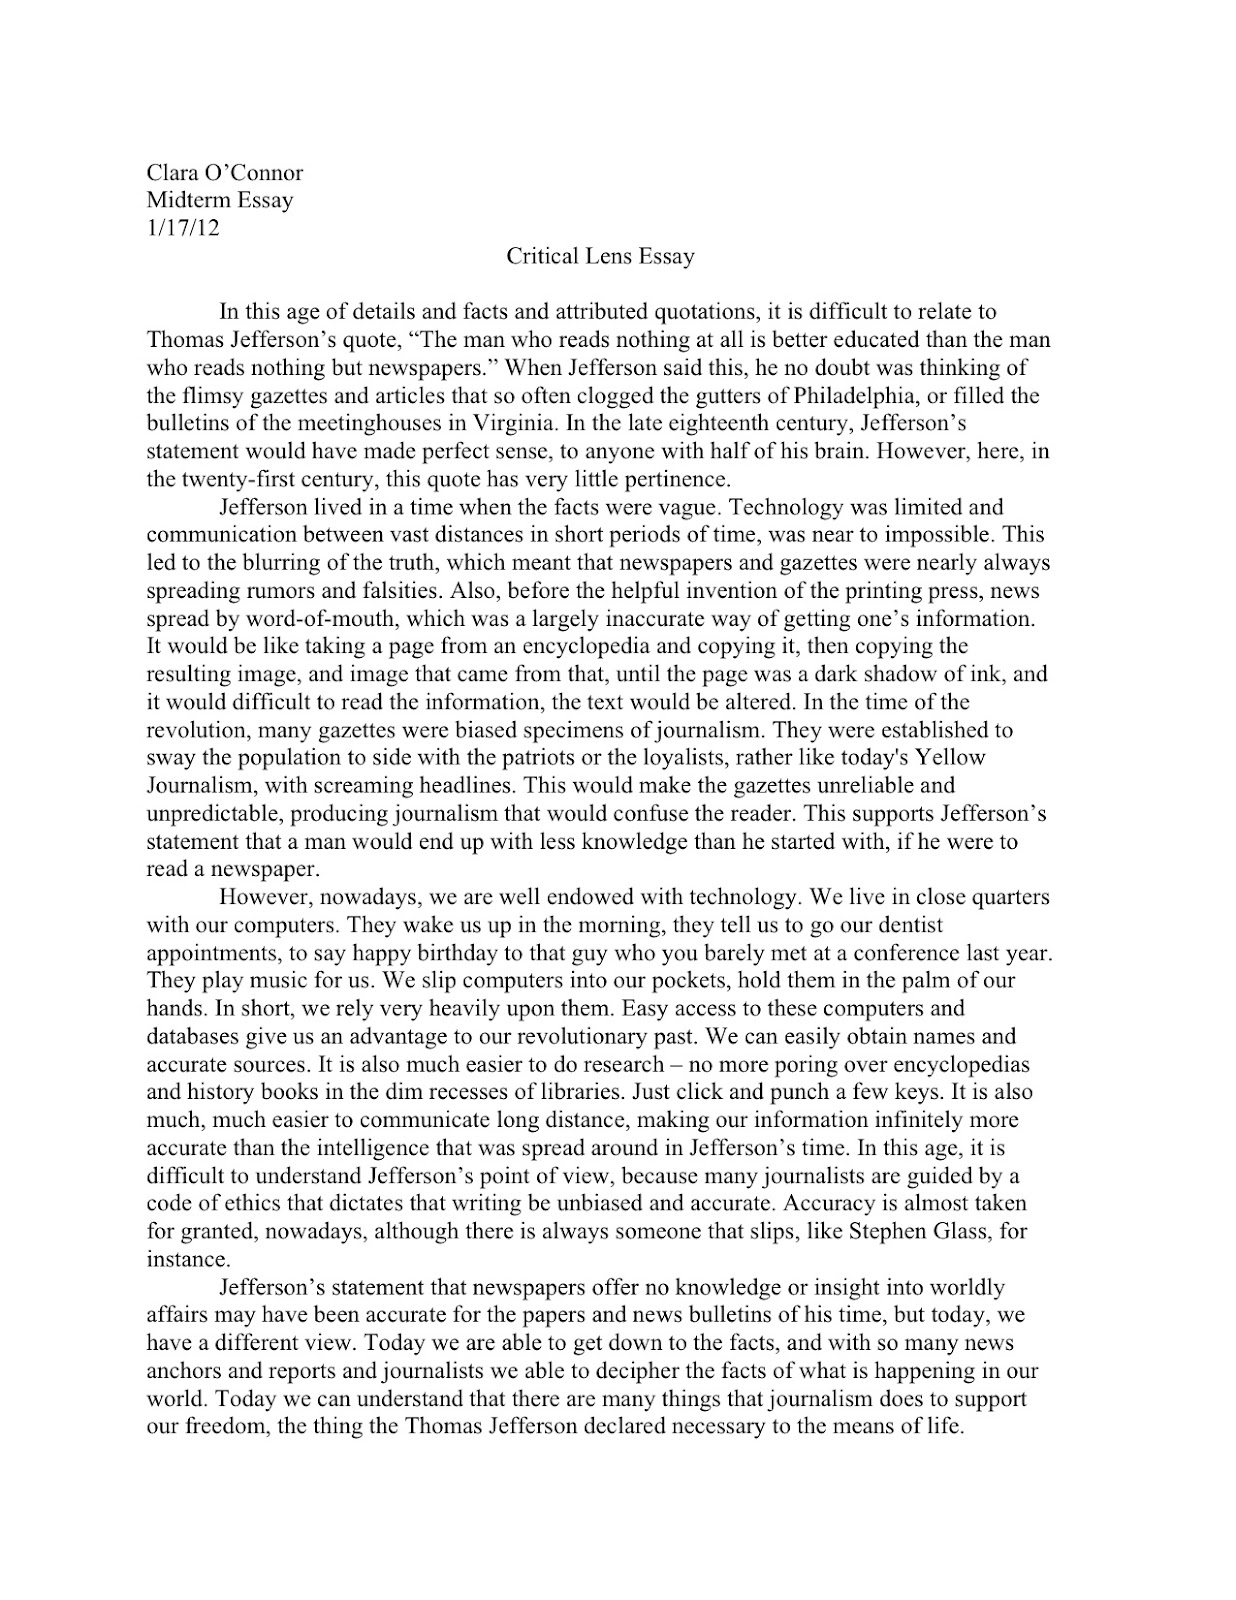 How to Write a Thesis Statement for a Critical Lens Essay